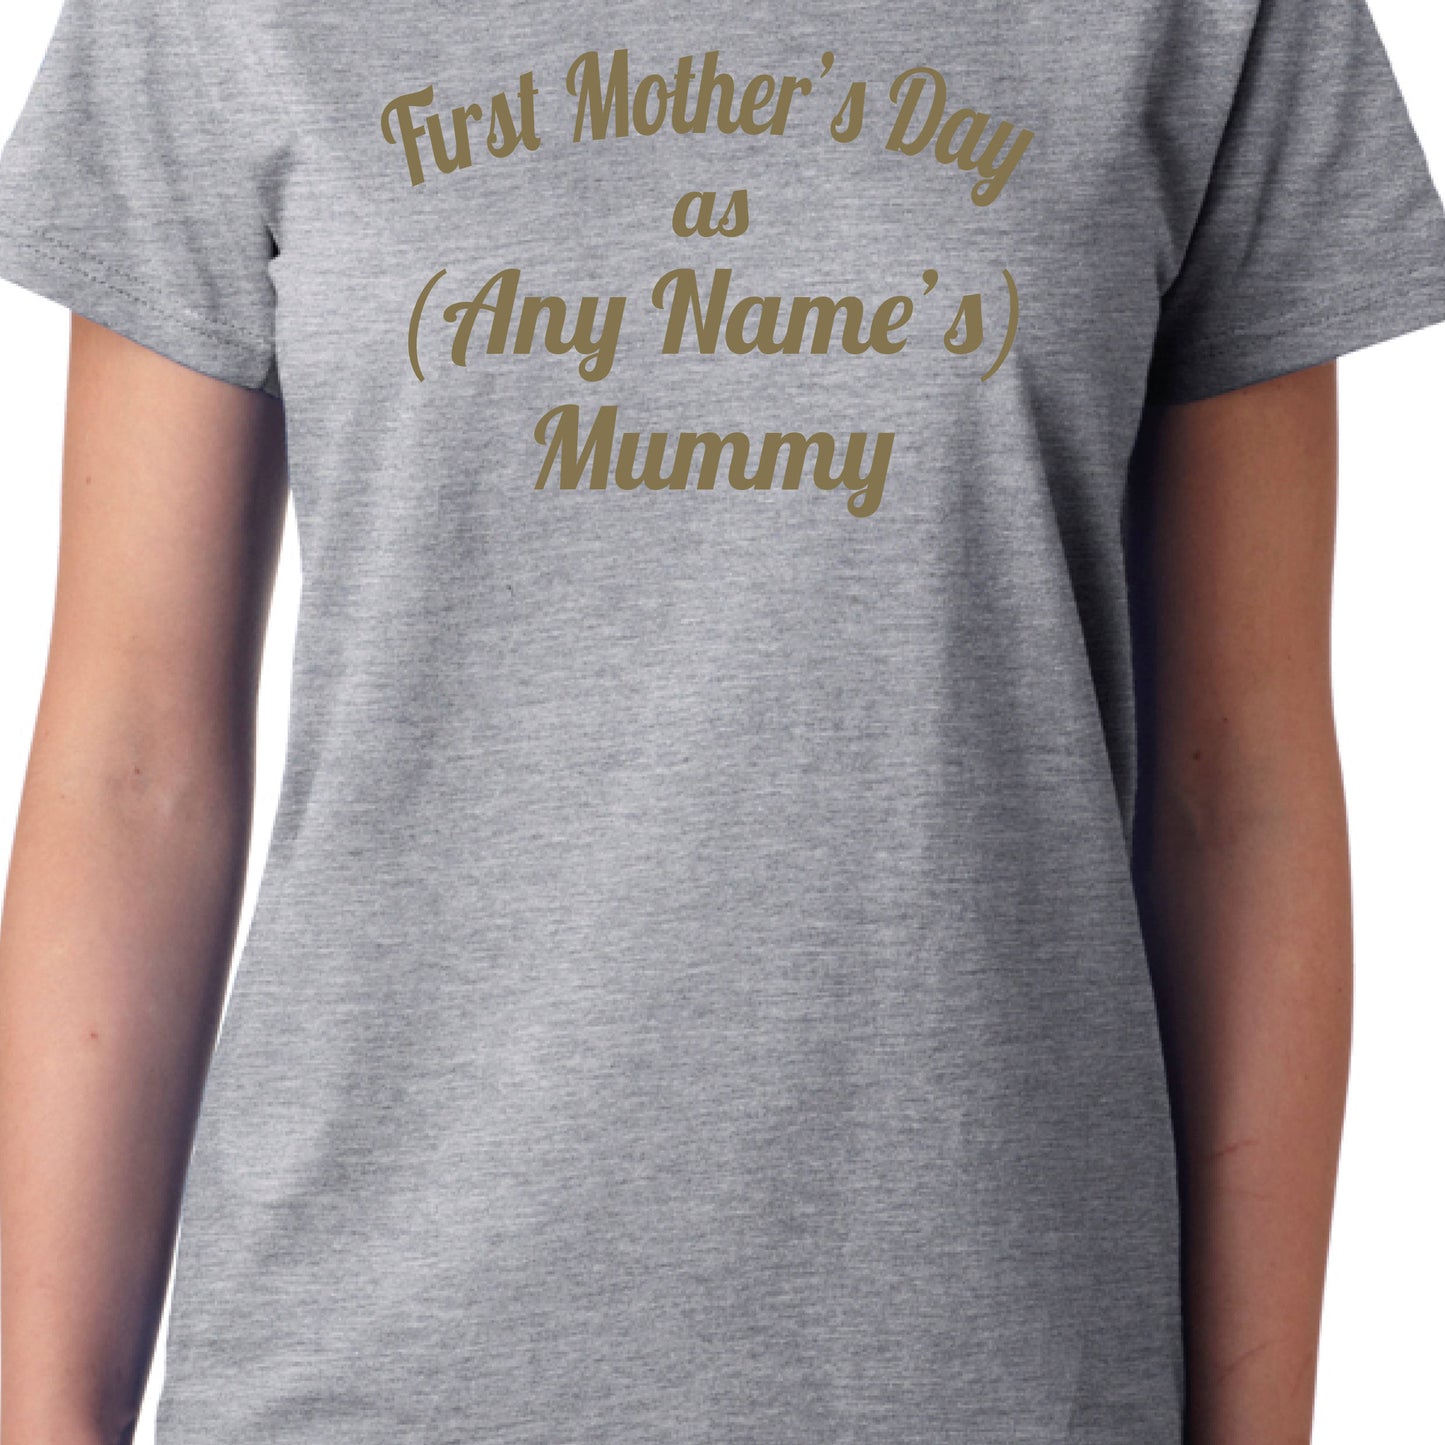 First Mother's Day as (Any Name's) Mummy Gold Personalised T-Shirt, Ladies, Unisex